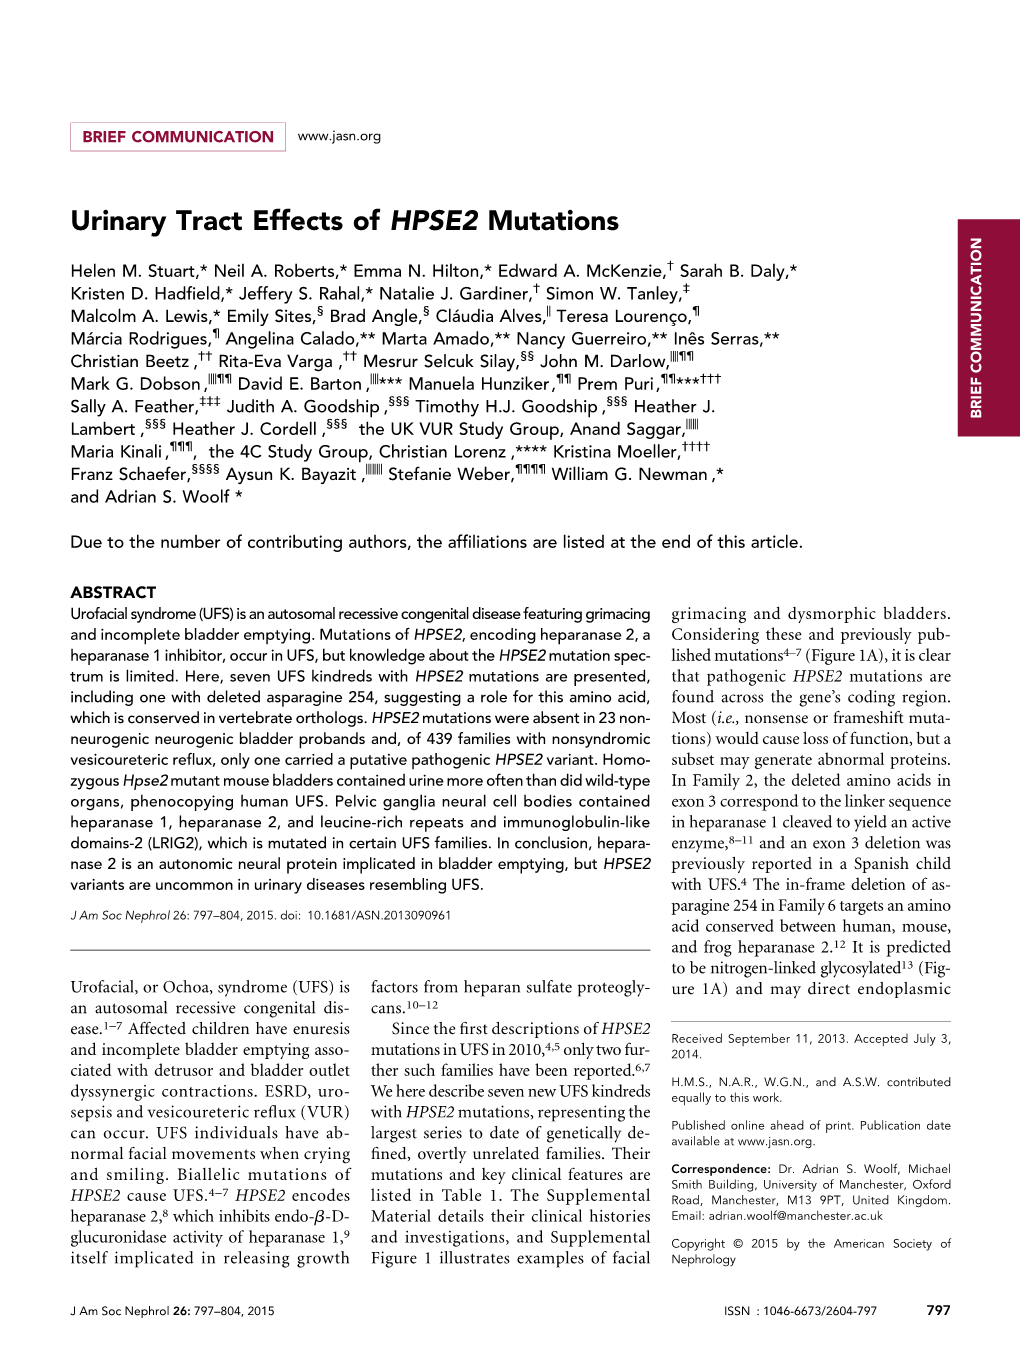 Urinary Tract Effects of HPSE2 Mutations